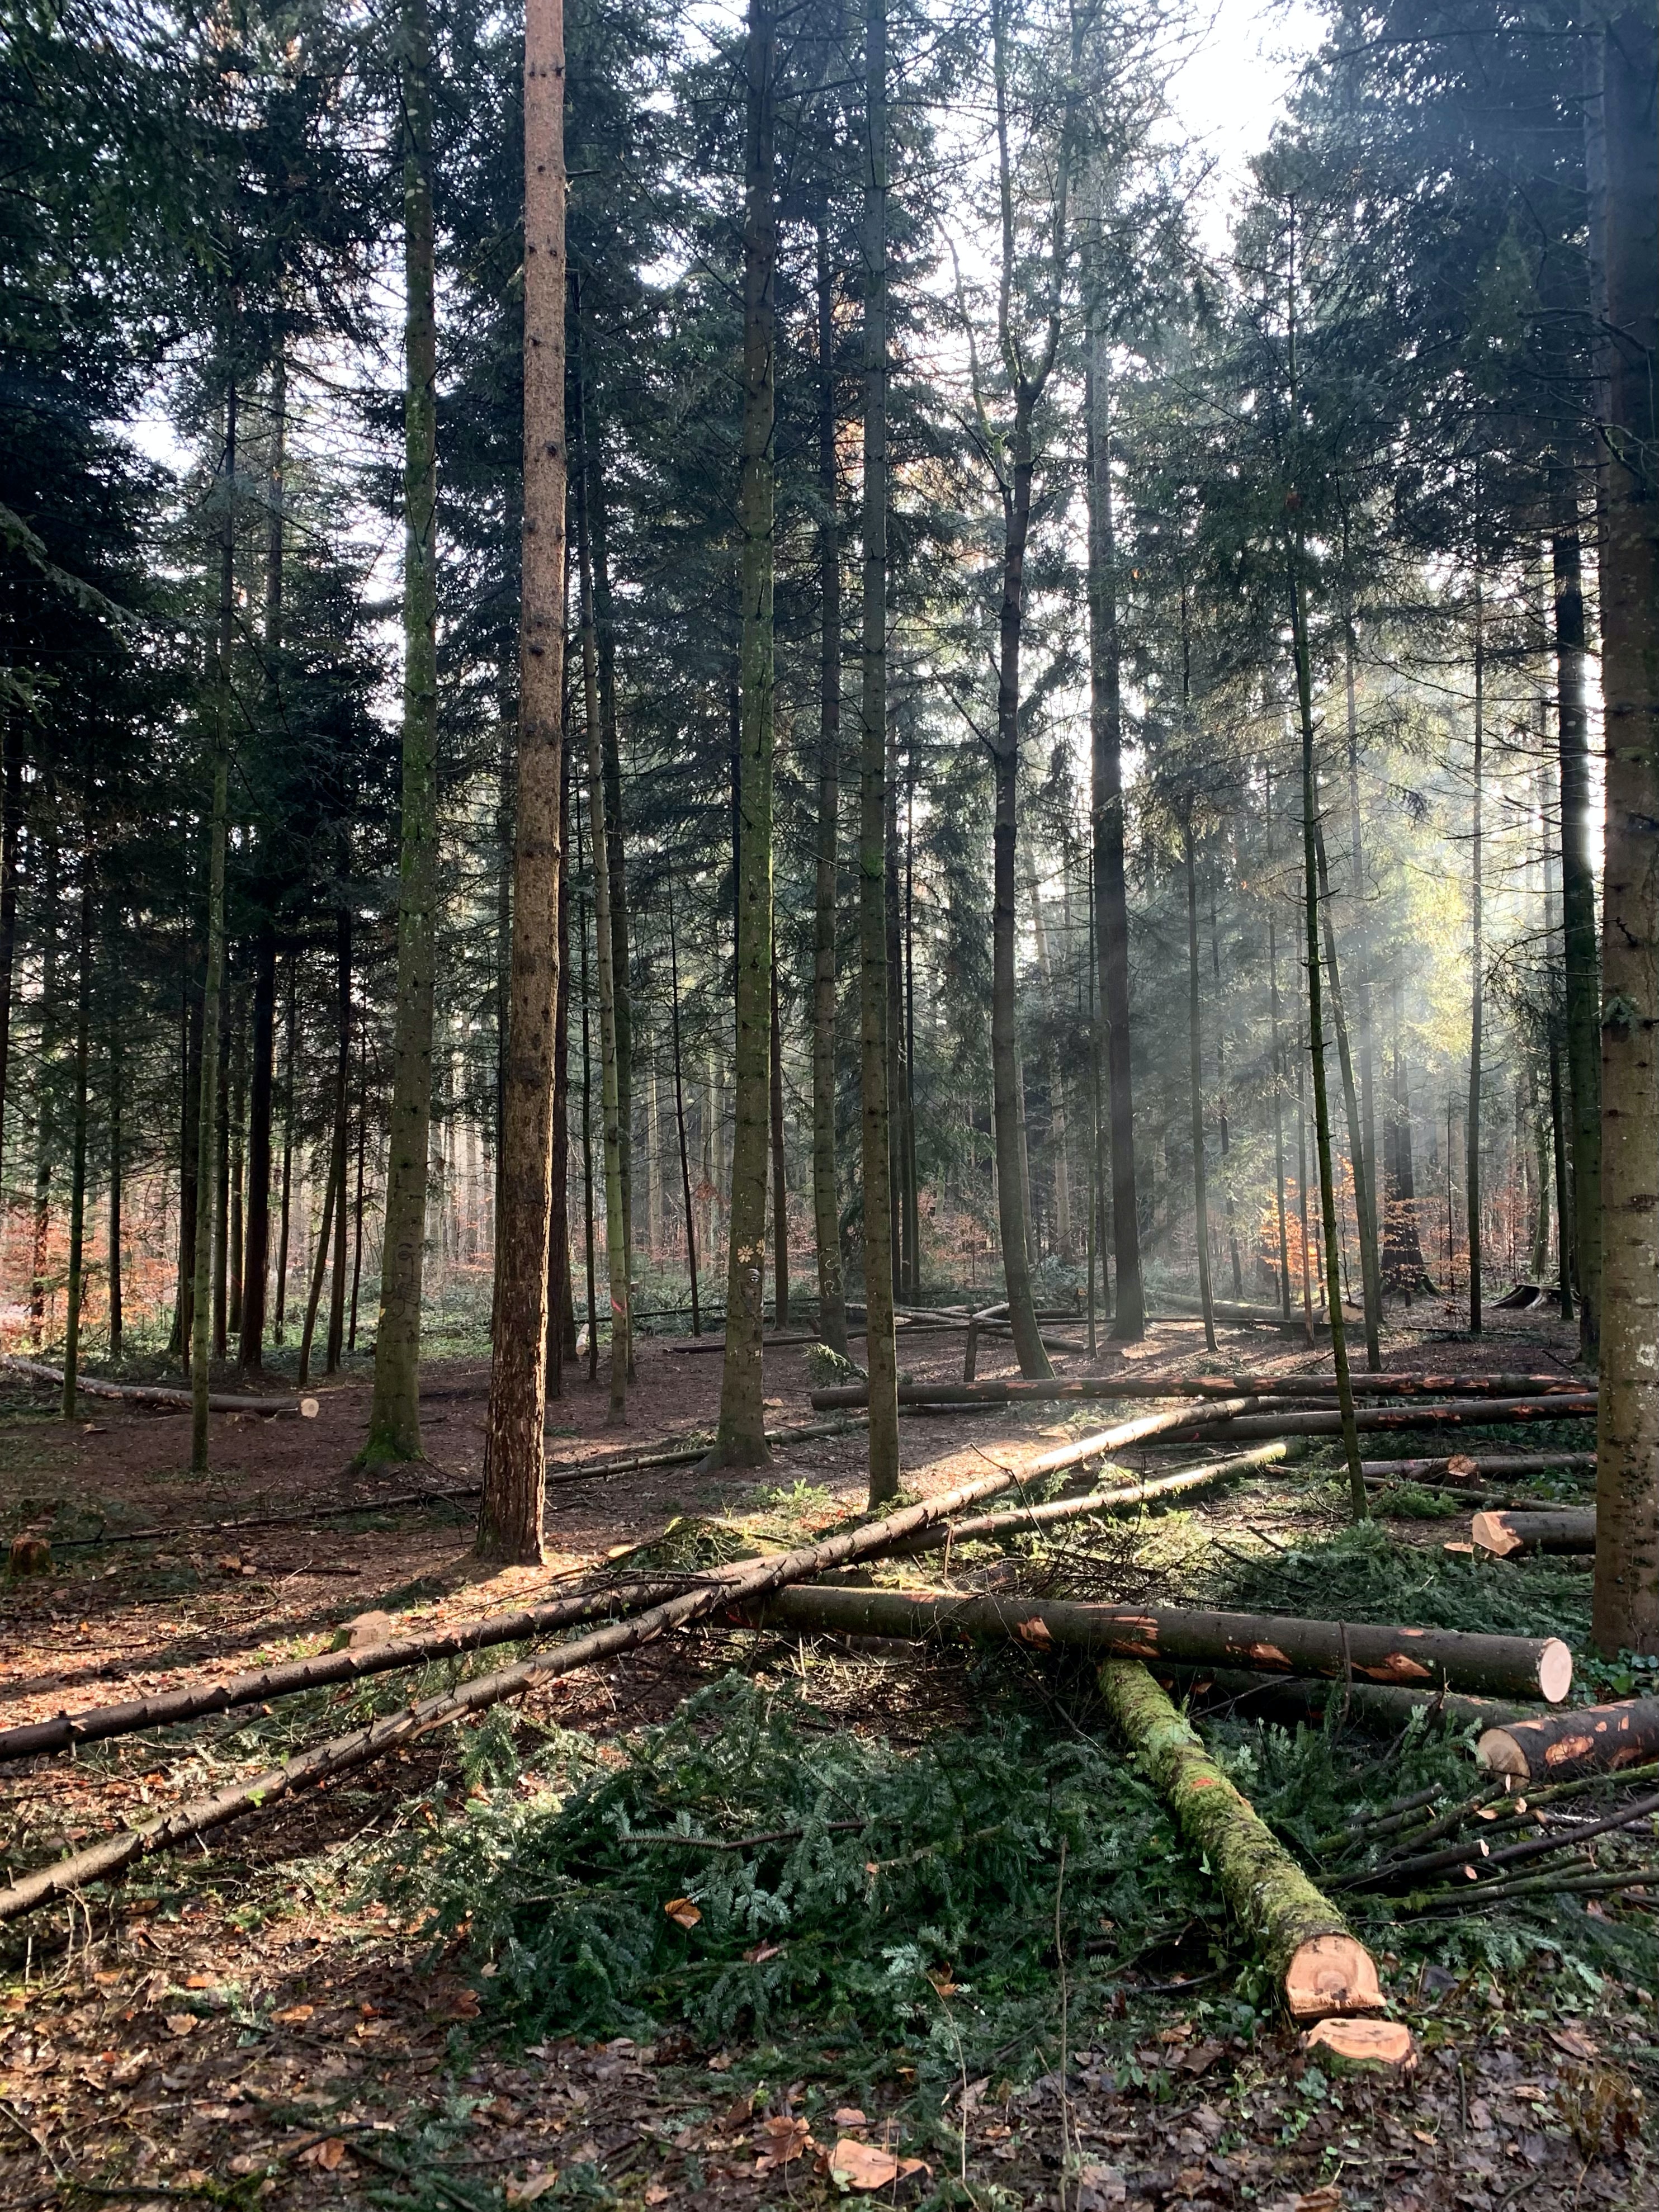 an image of a forest with downed trees